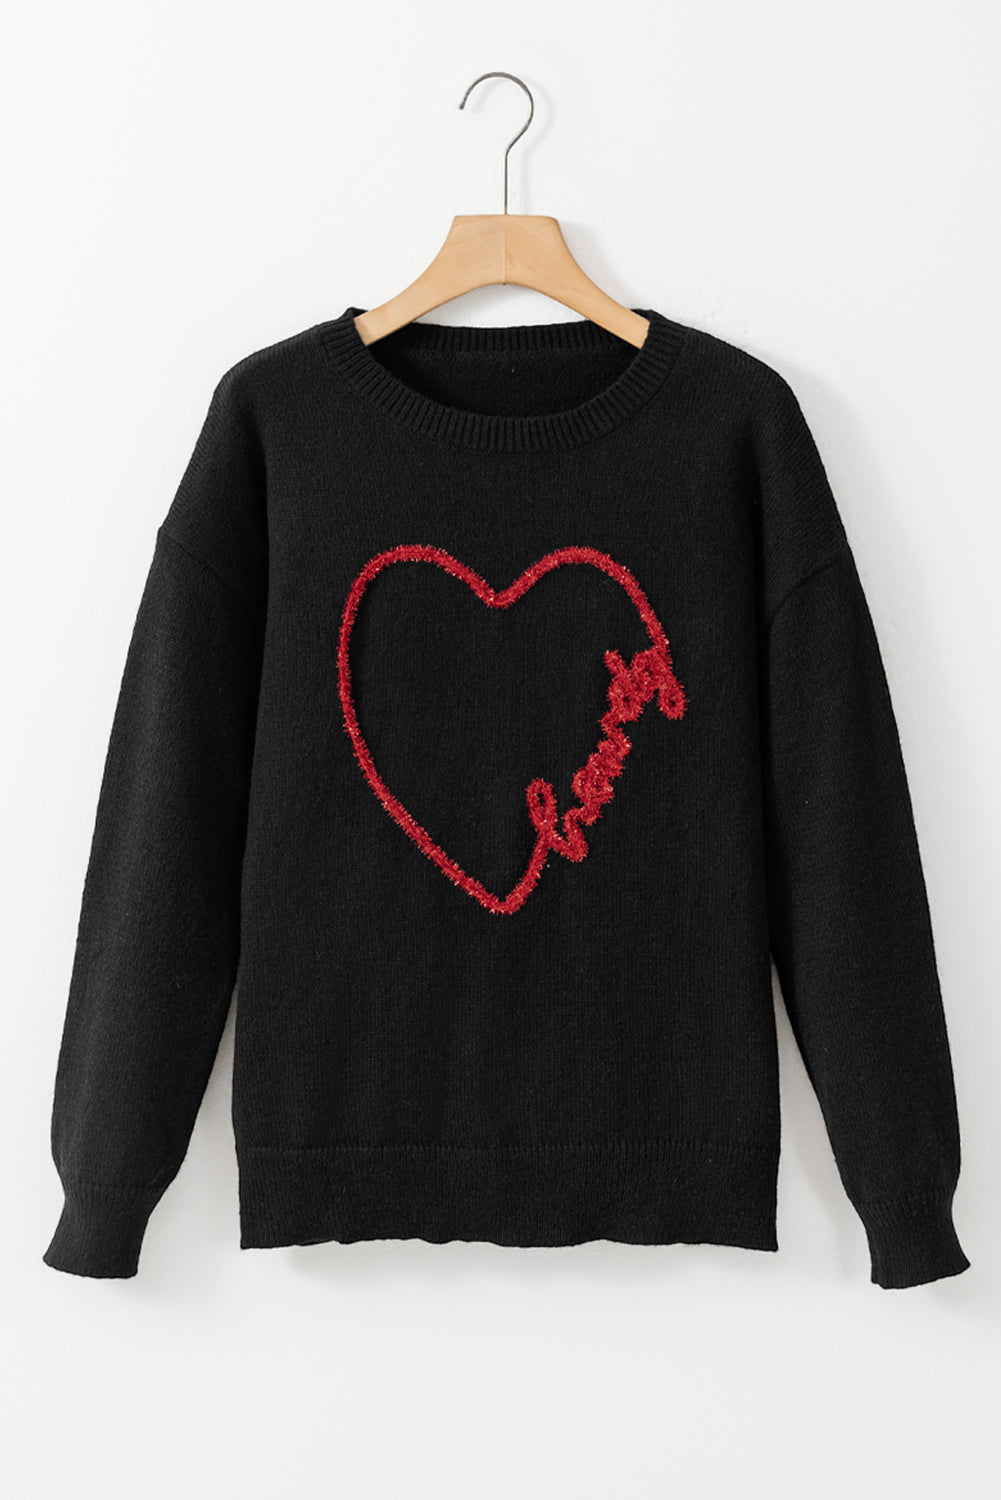 Black Howdy Heart Graphic Round Neck Casual Sweater